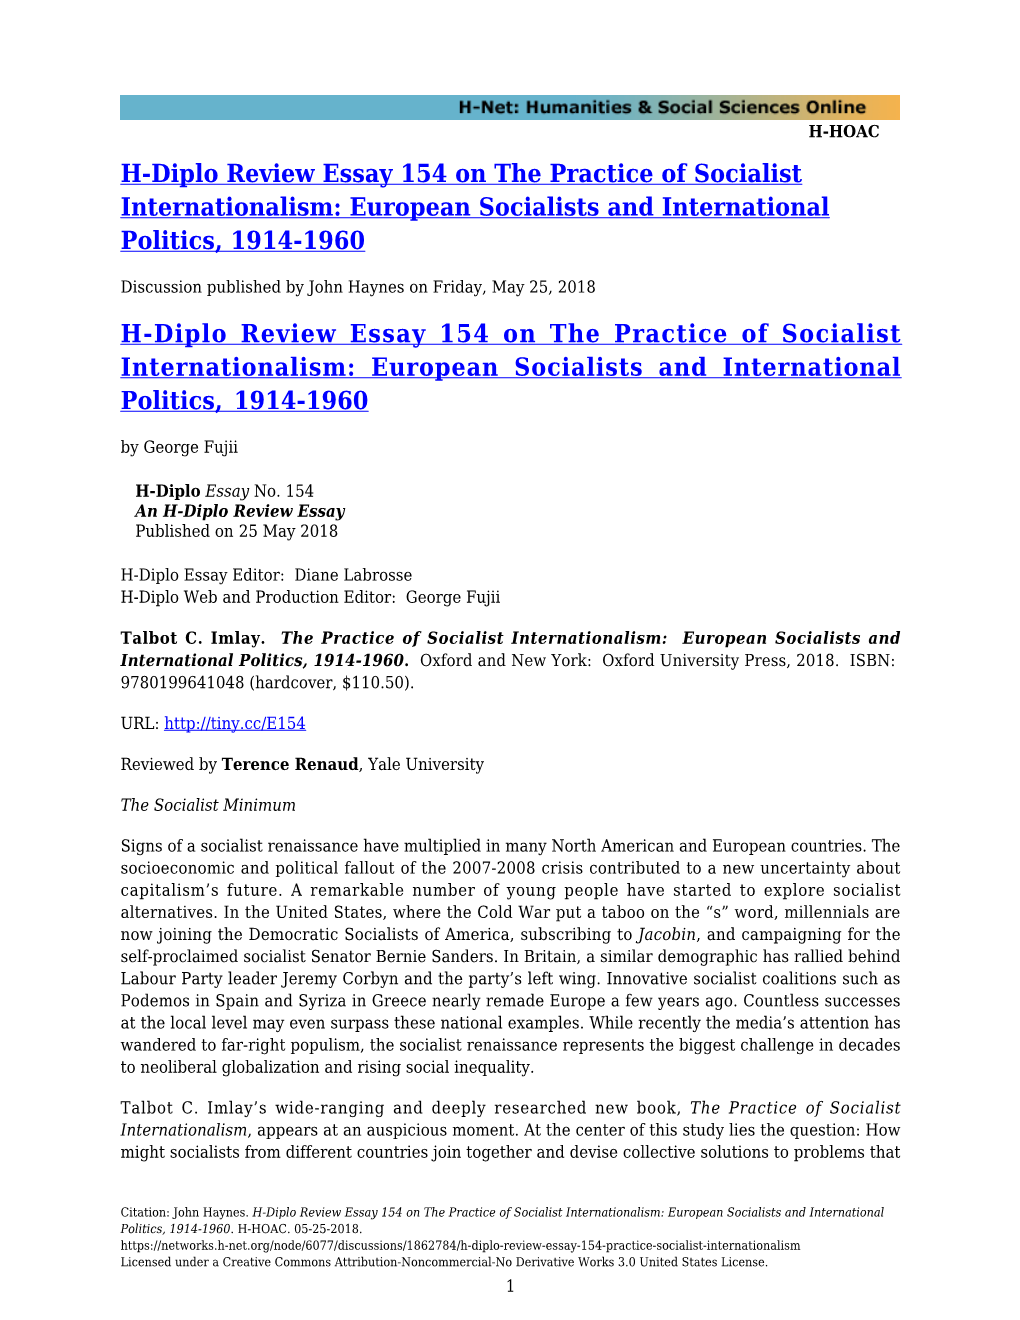 H-Diplo Review Essay 154 on the Practice of Socialist Internationalism: European Socialists and International Politics, 1914-1960